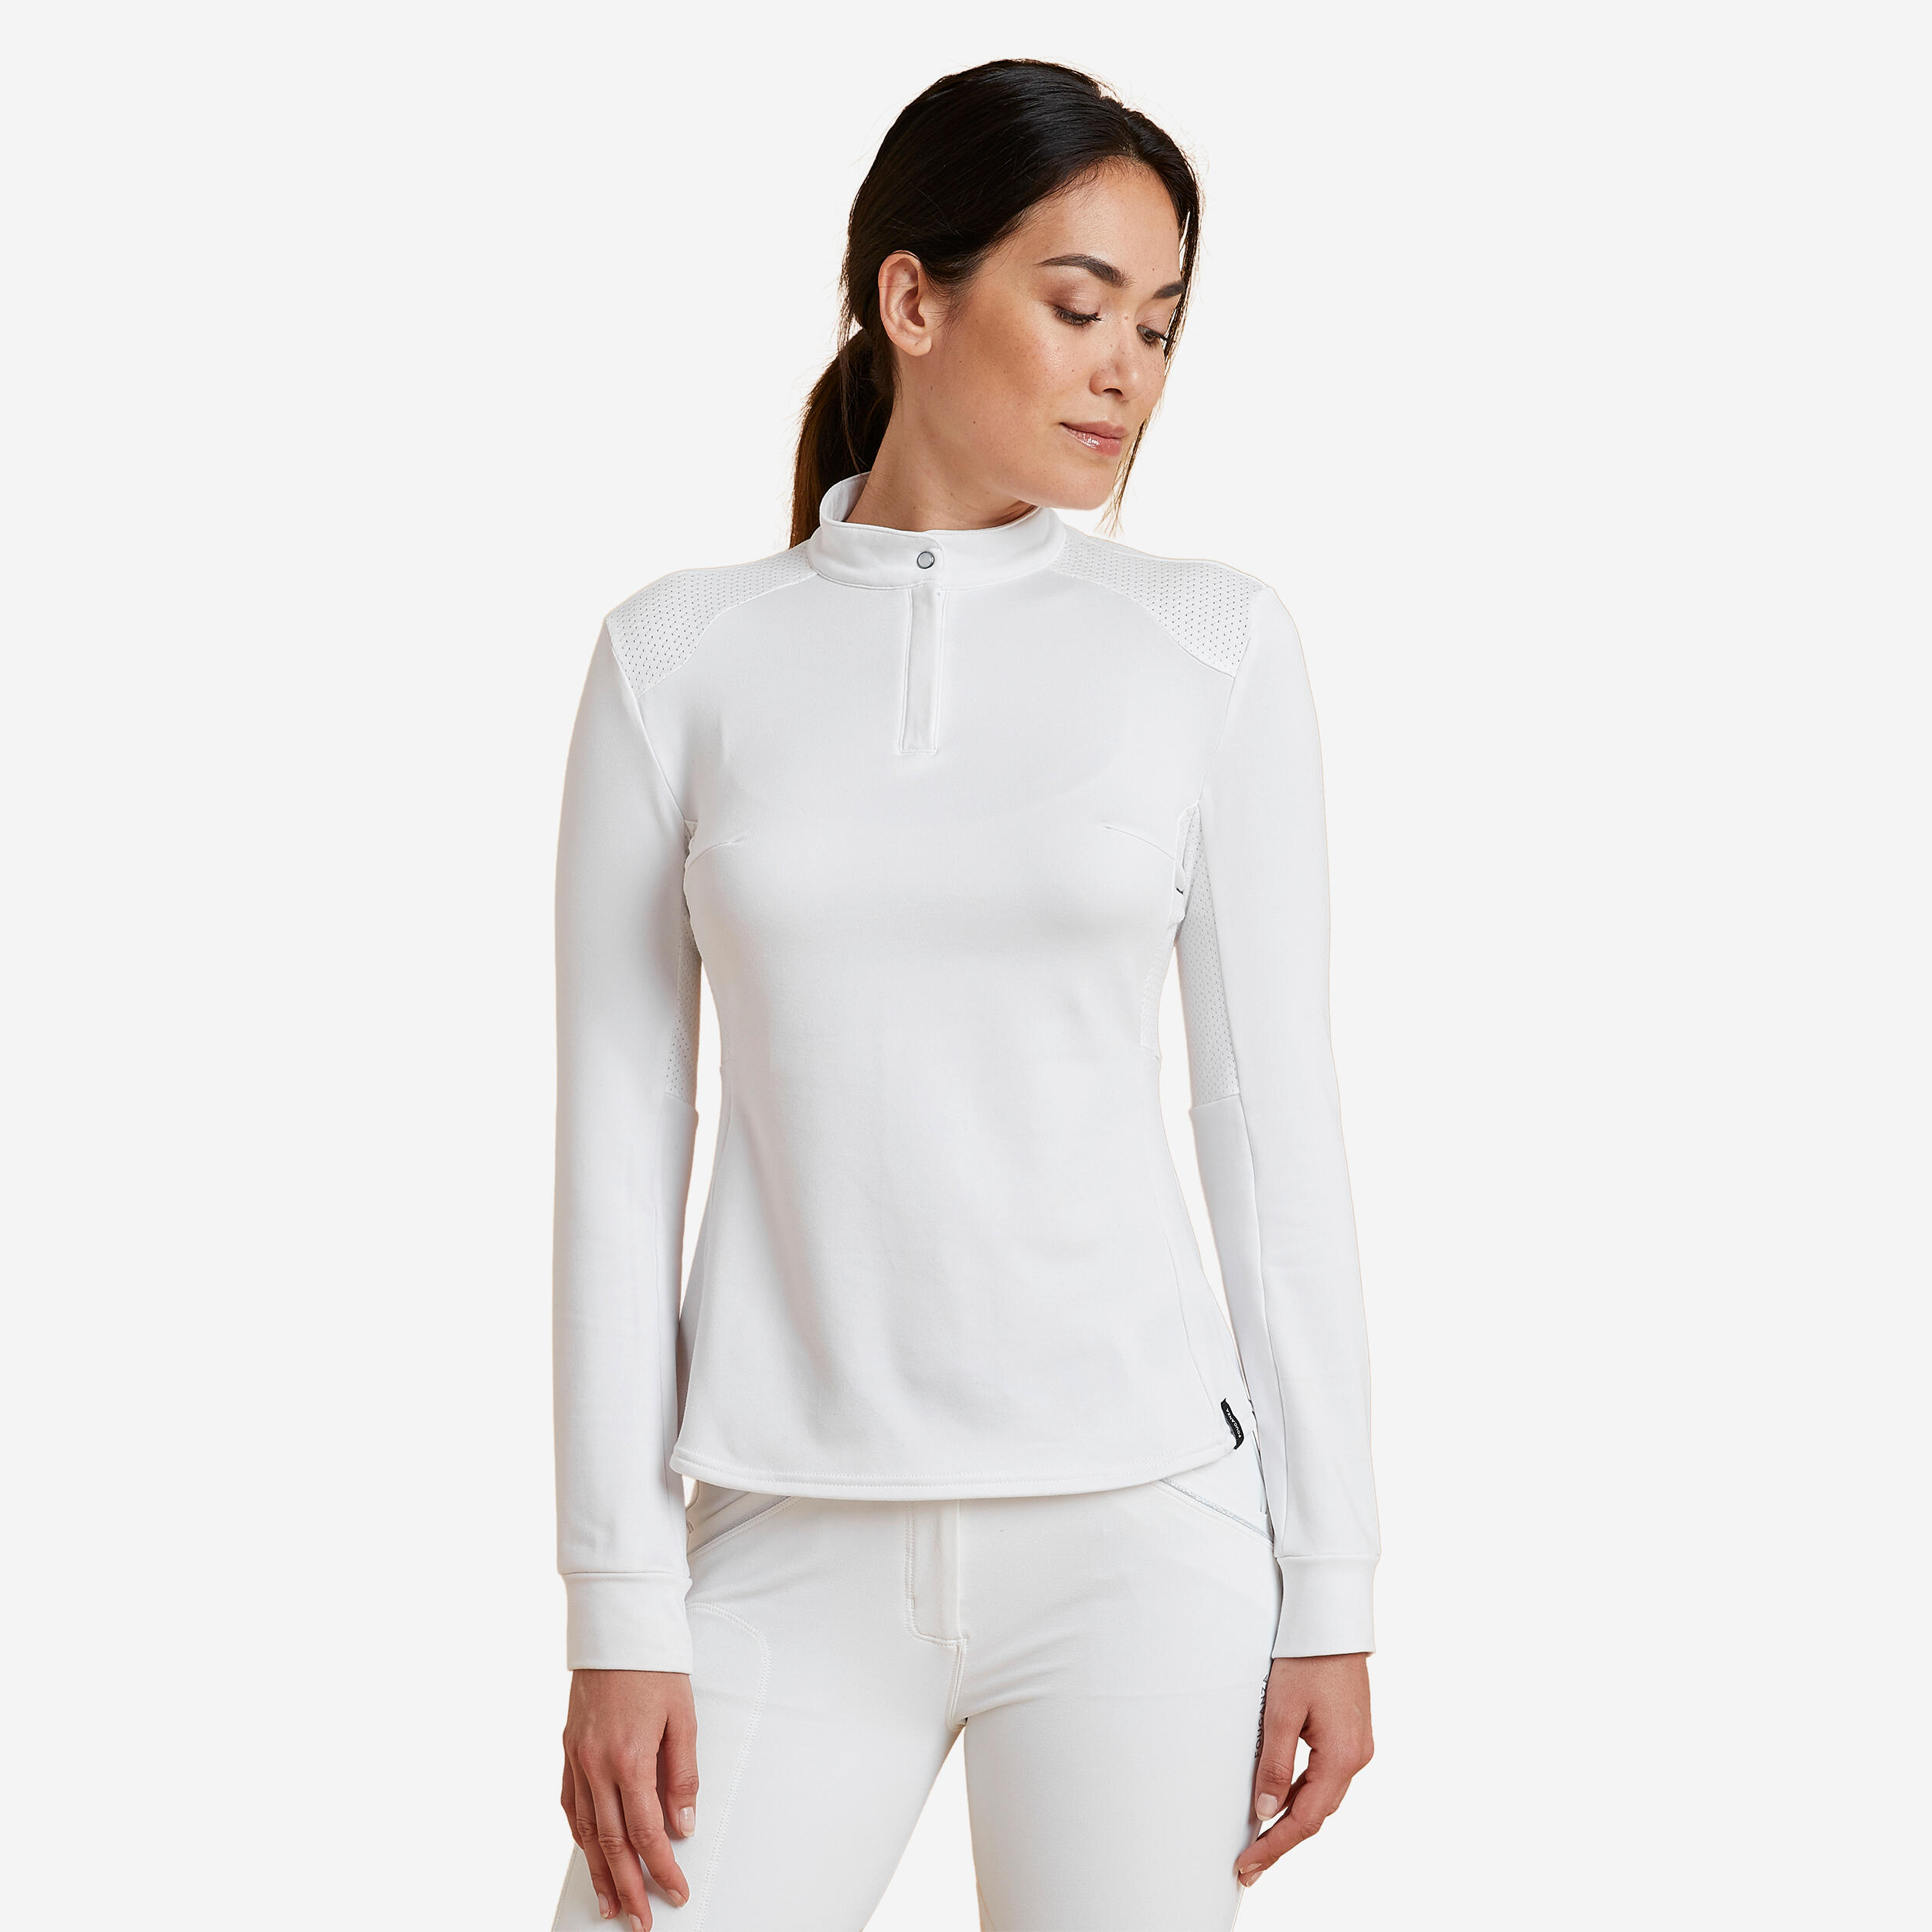 Women's Horse Riding Long-Sleeved Warm Competition Polo 500 - White 1/7